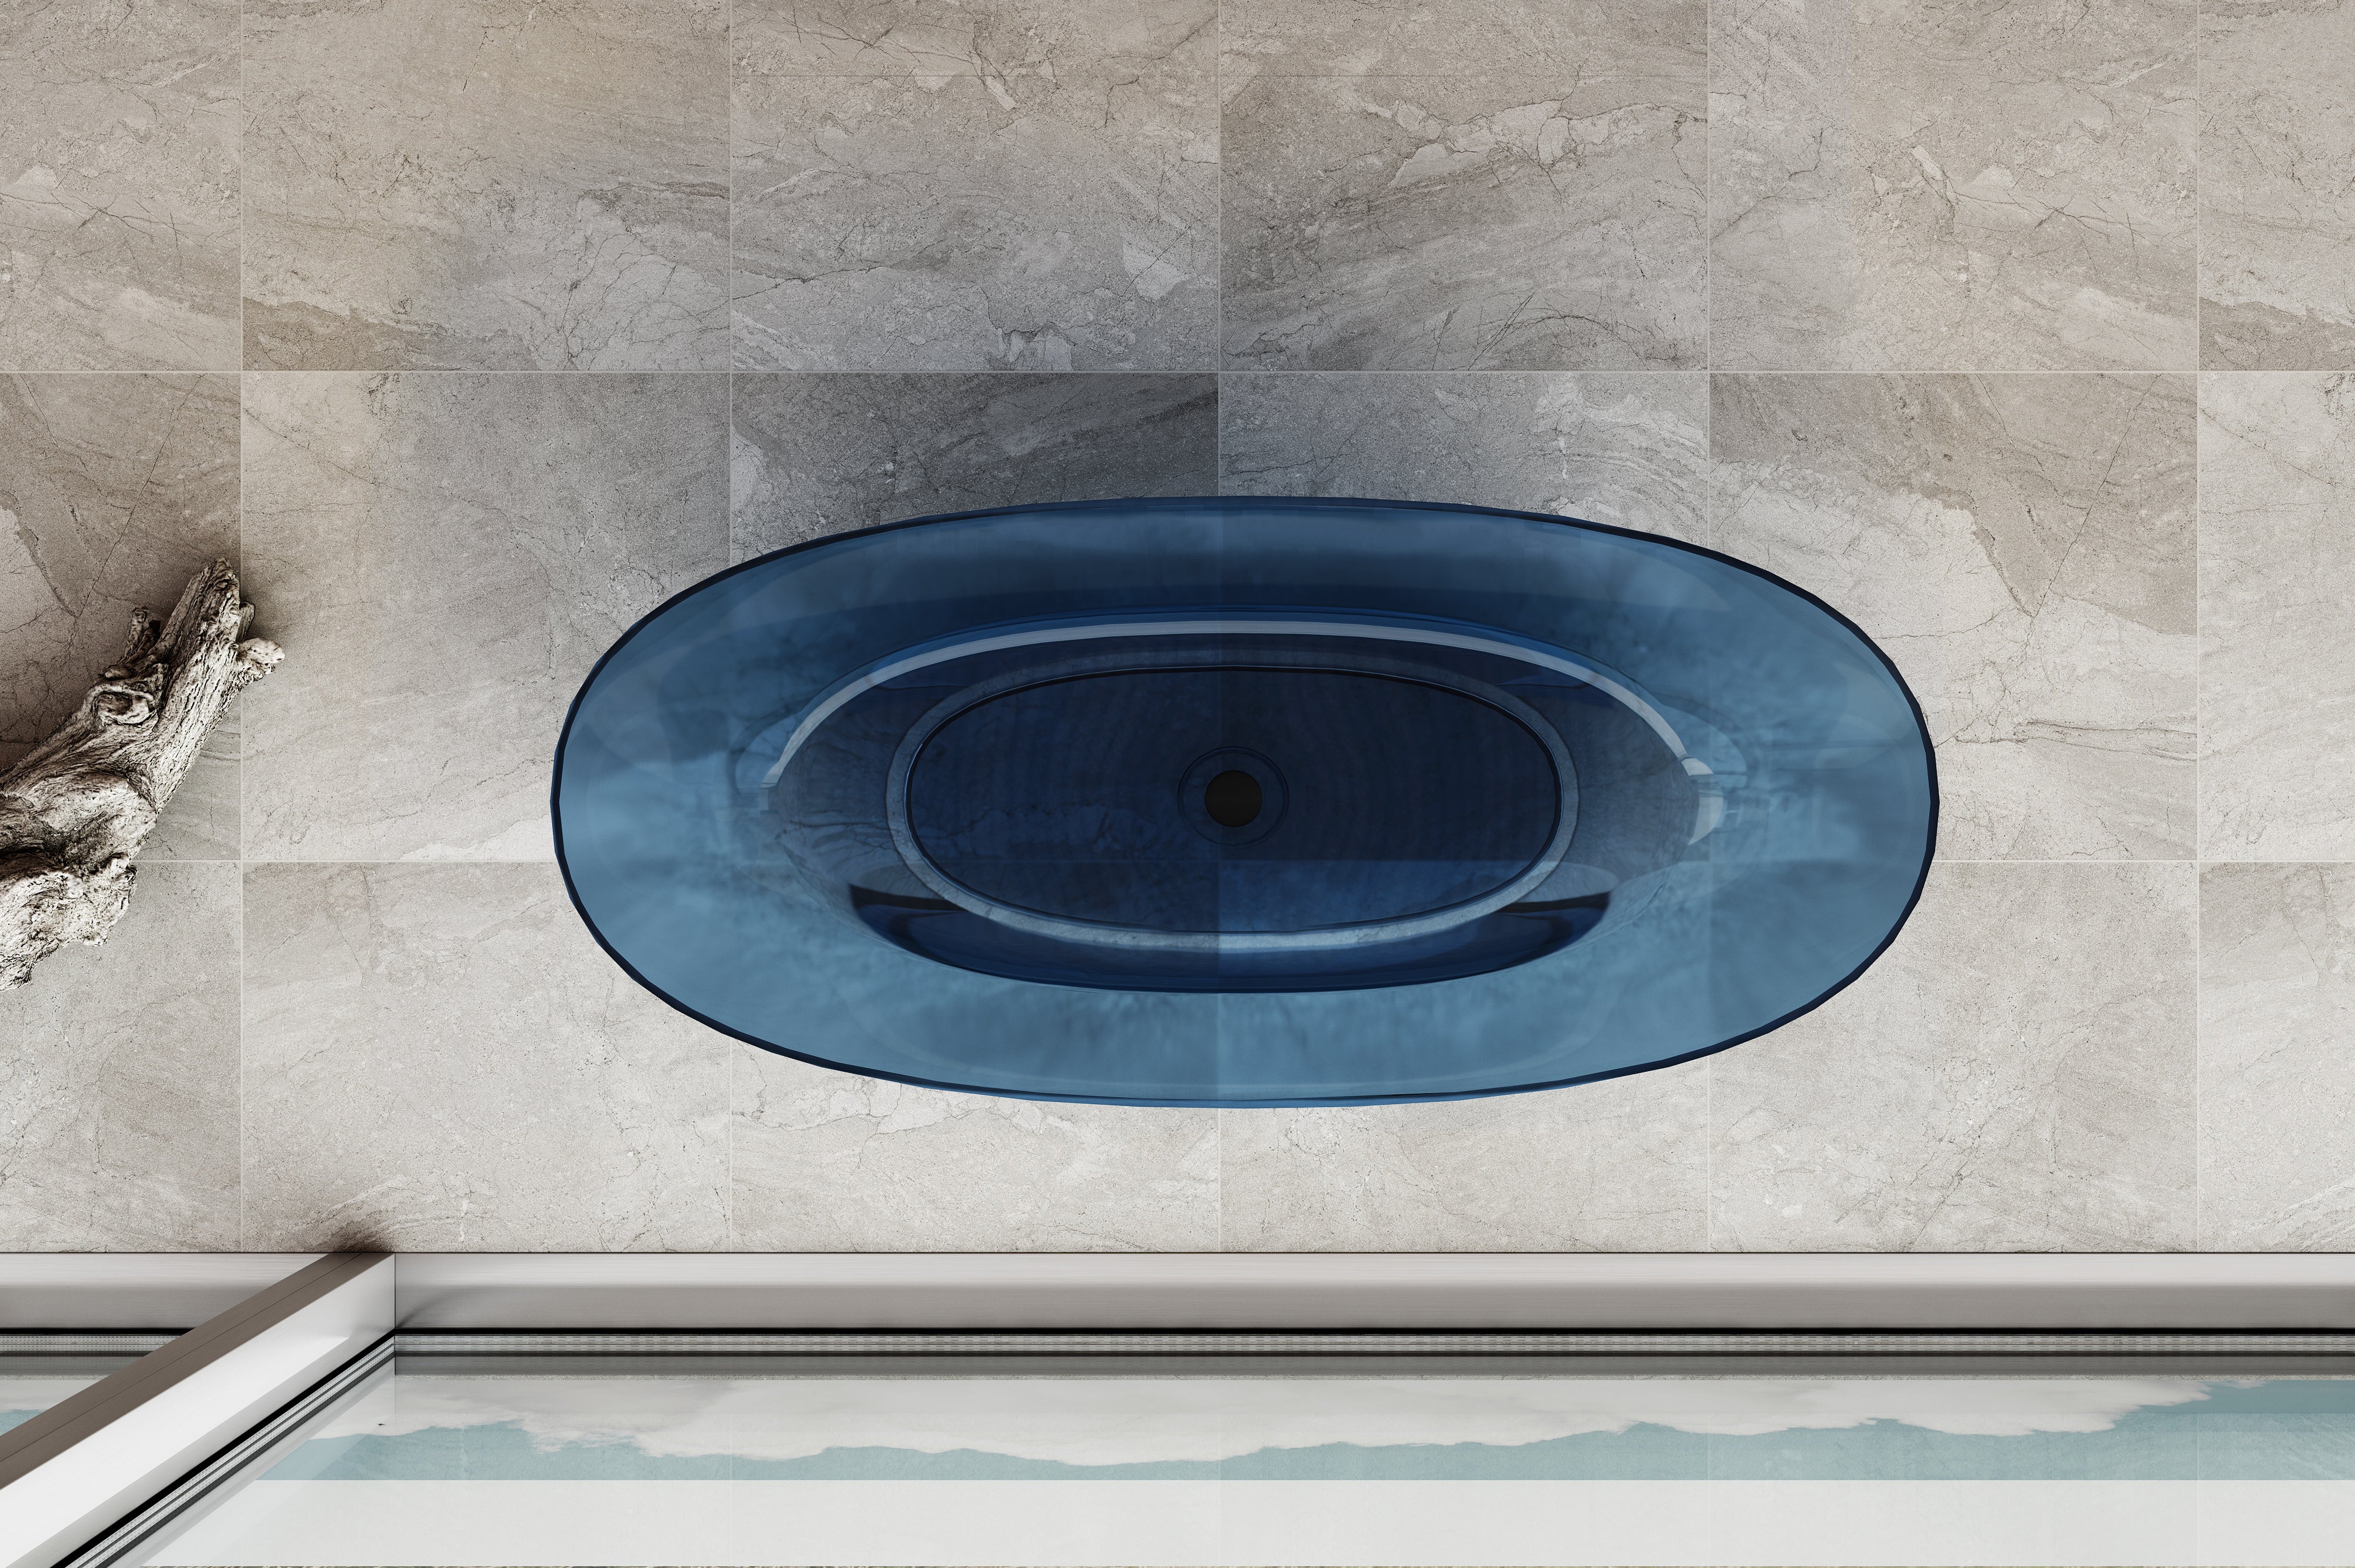 RIVA NOTO FREESTANDING BATHTUB TRANSPARENT BLUE (AVAILABLE IN 1500MM AND 1700MM)